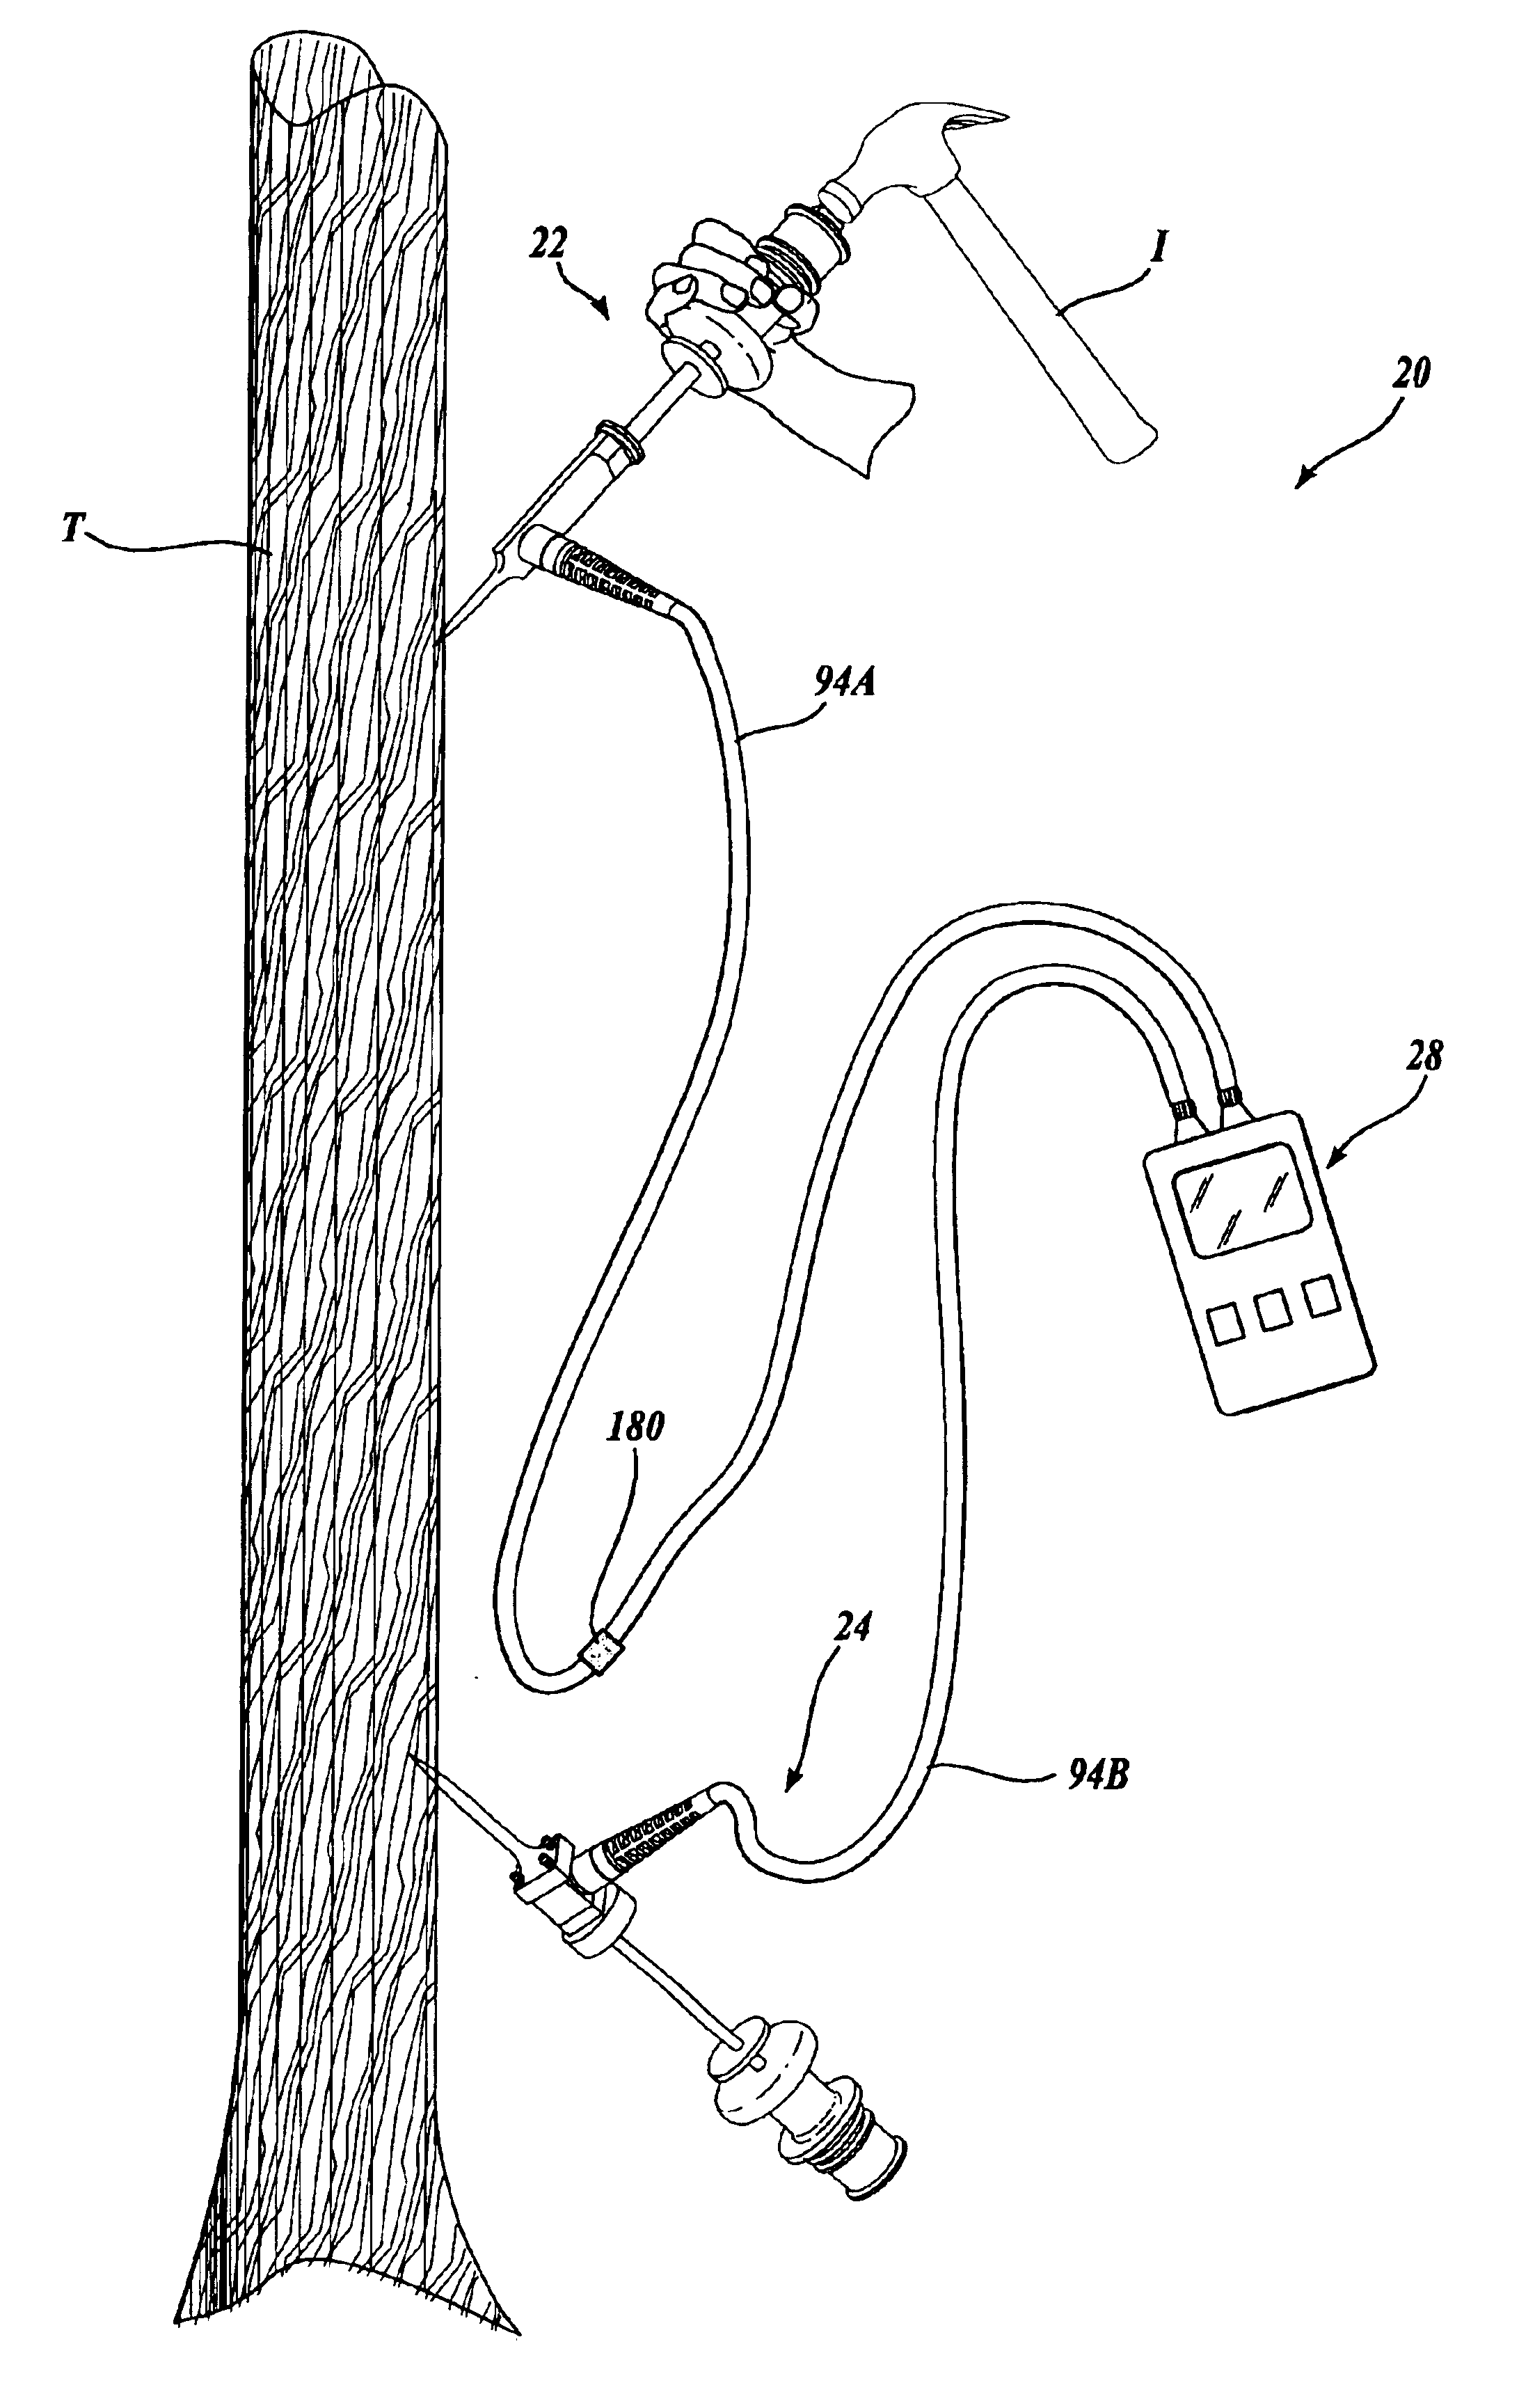 System and method for measuring stiffness in standing trees